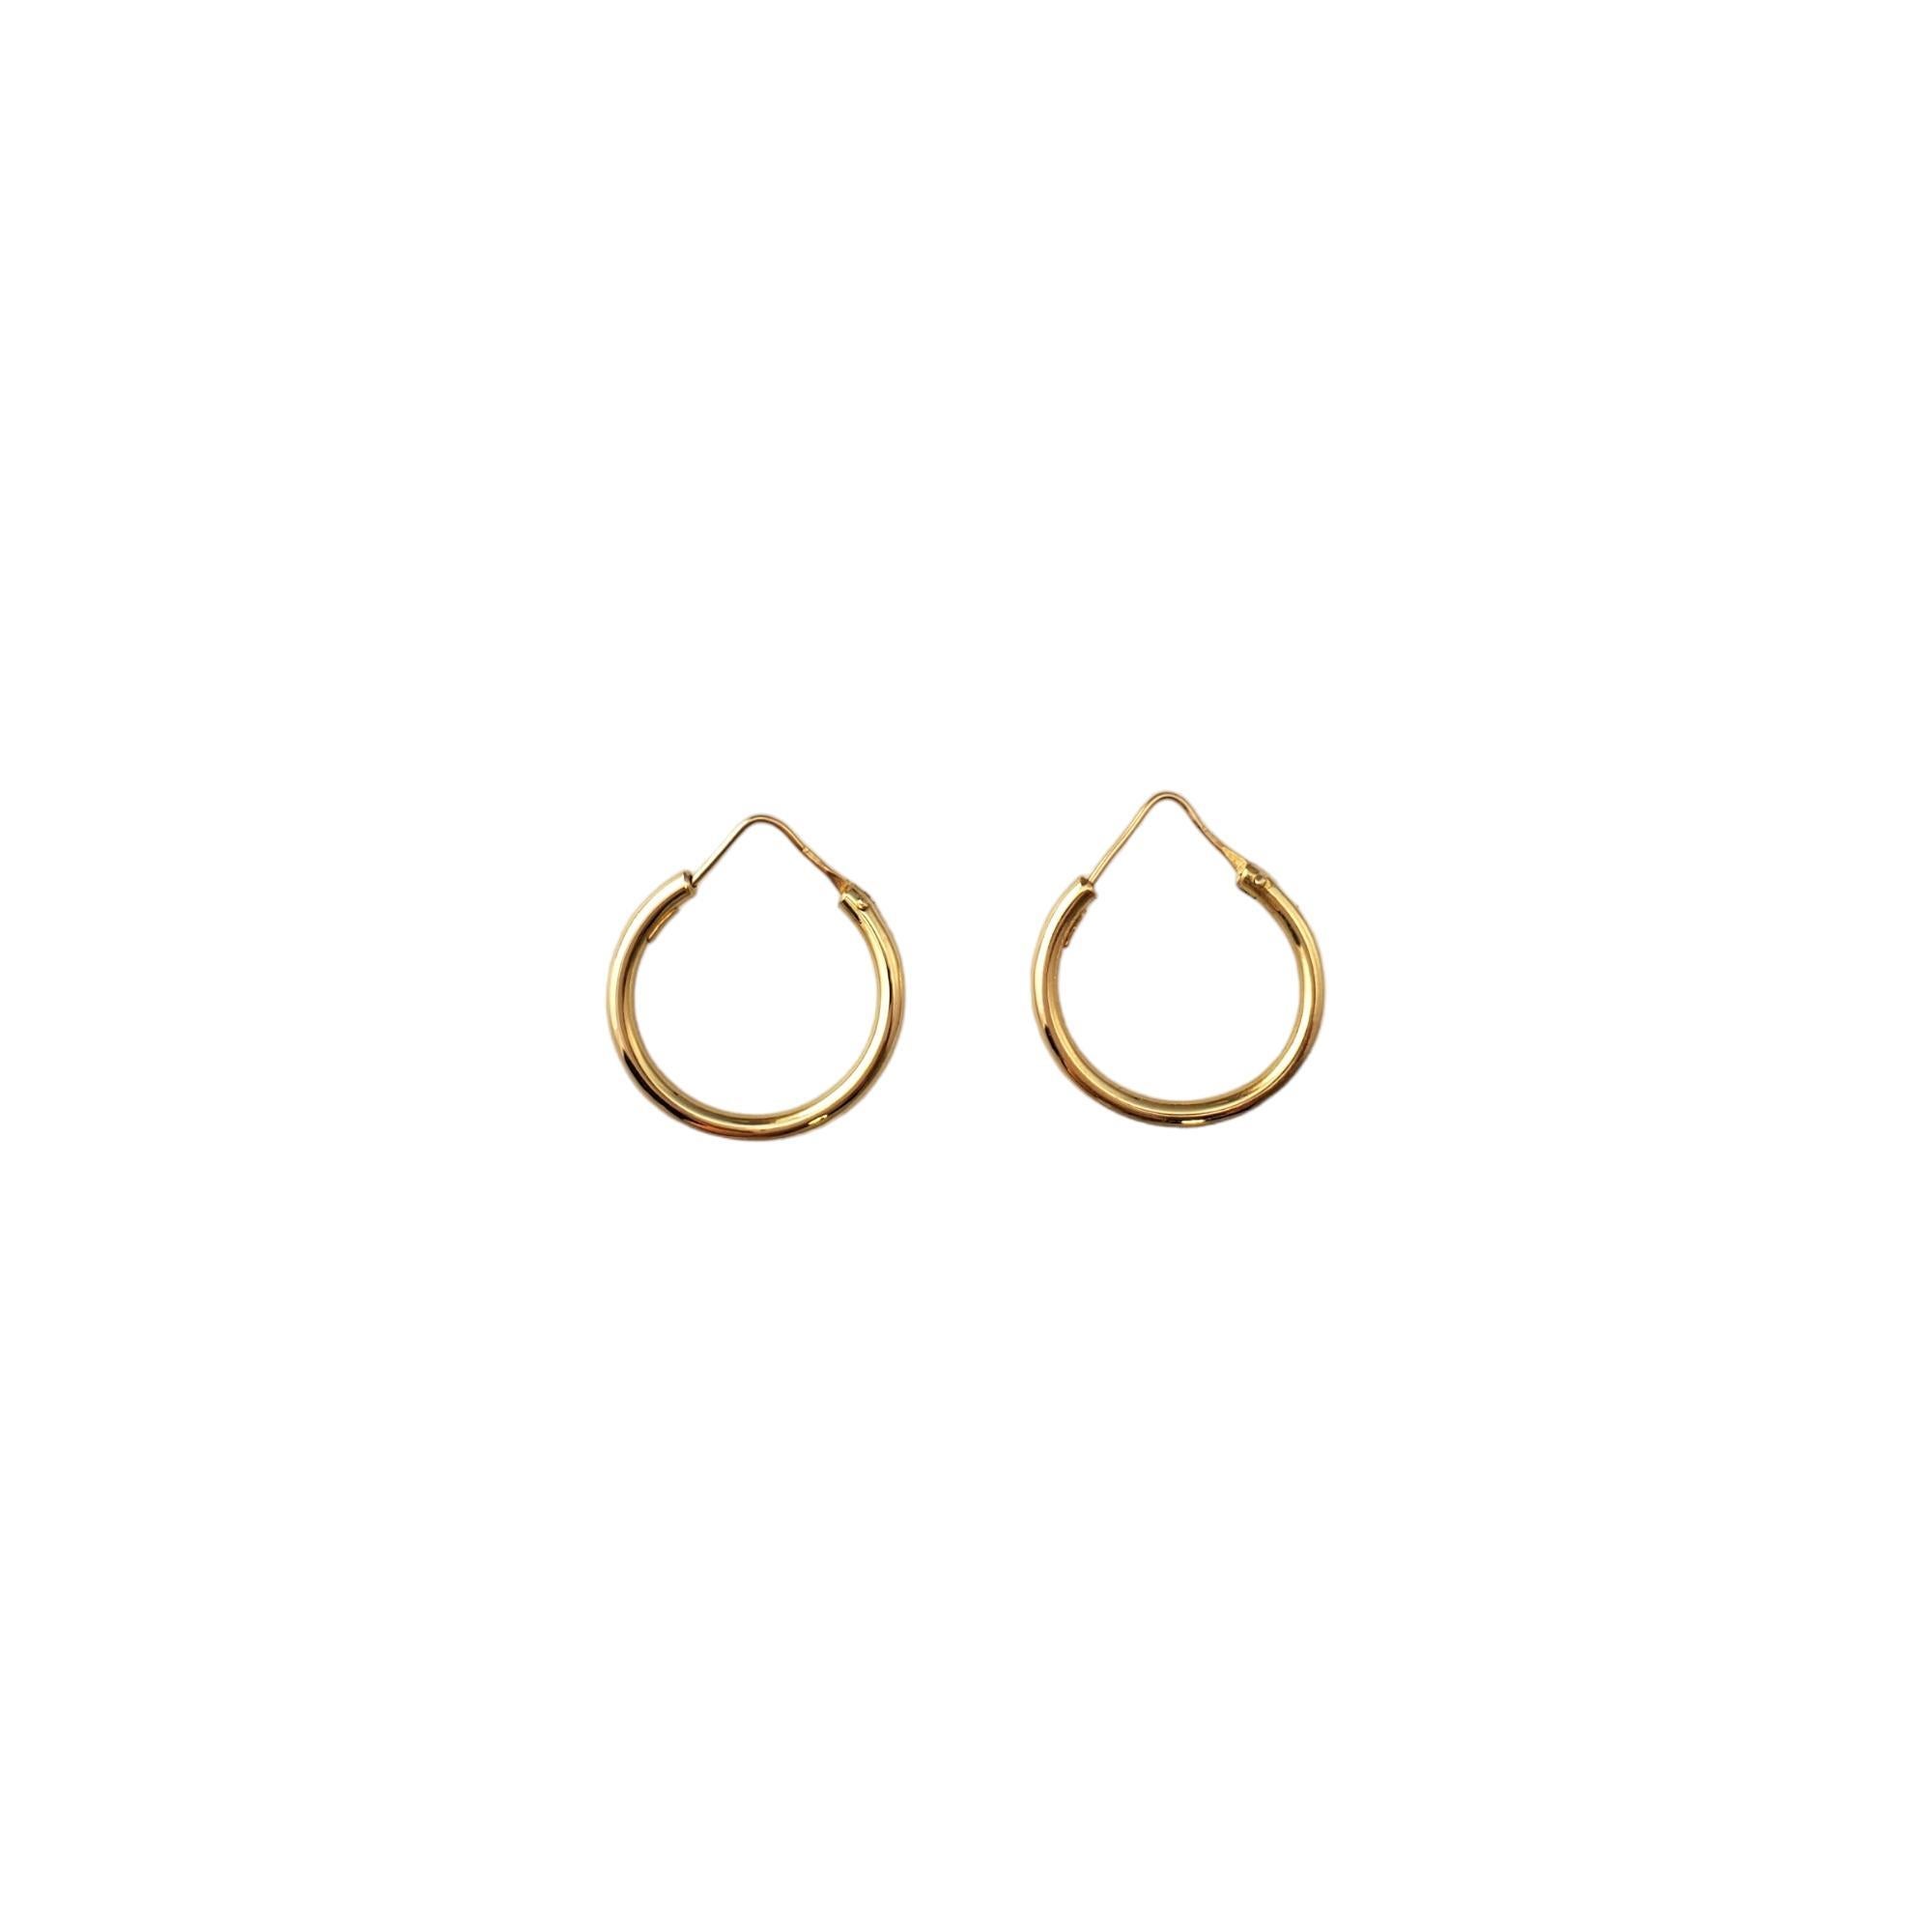 18K Yellow Gold Hoop Earrings 

These classic earrings are a staple to your collection. 

Size: 26.8mm X 2.3mm X 2.5mm

Weight: 1.5dwt. / 2.3 gr.

Marked: 750

Very good condition, professionally polished.

Will come packaged in a gift box or pouch